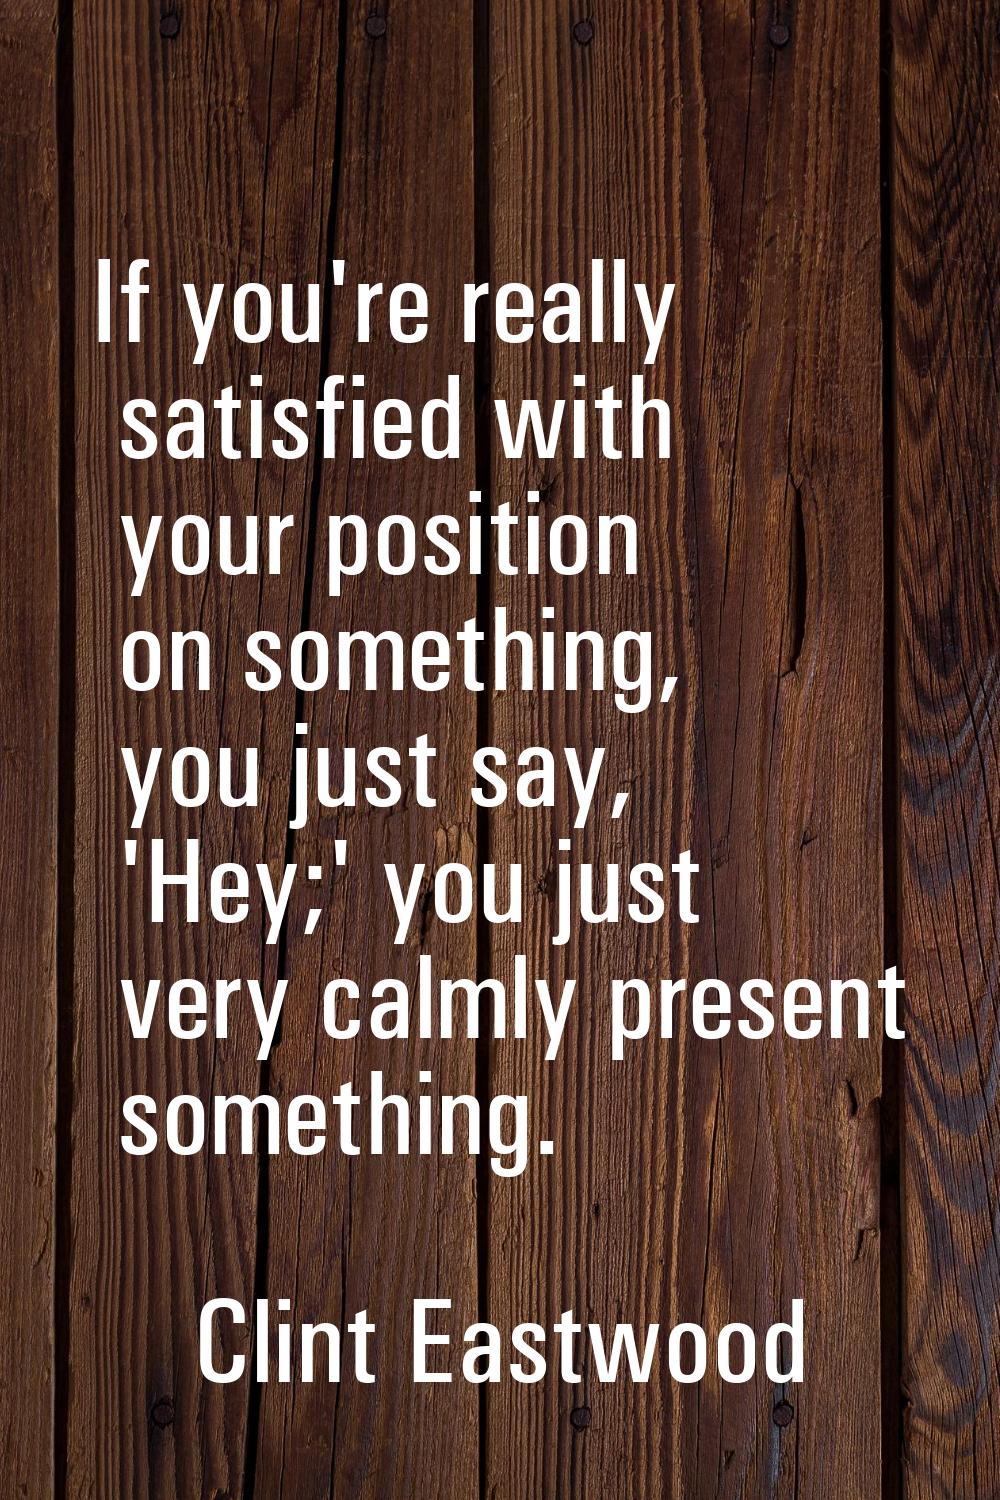 If you're really satisfied with your position on something, you just say, 'Hey;' you just very calm